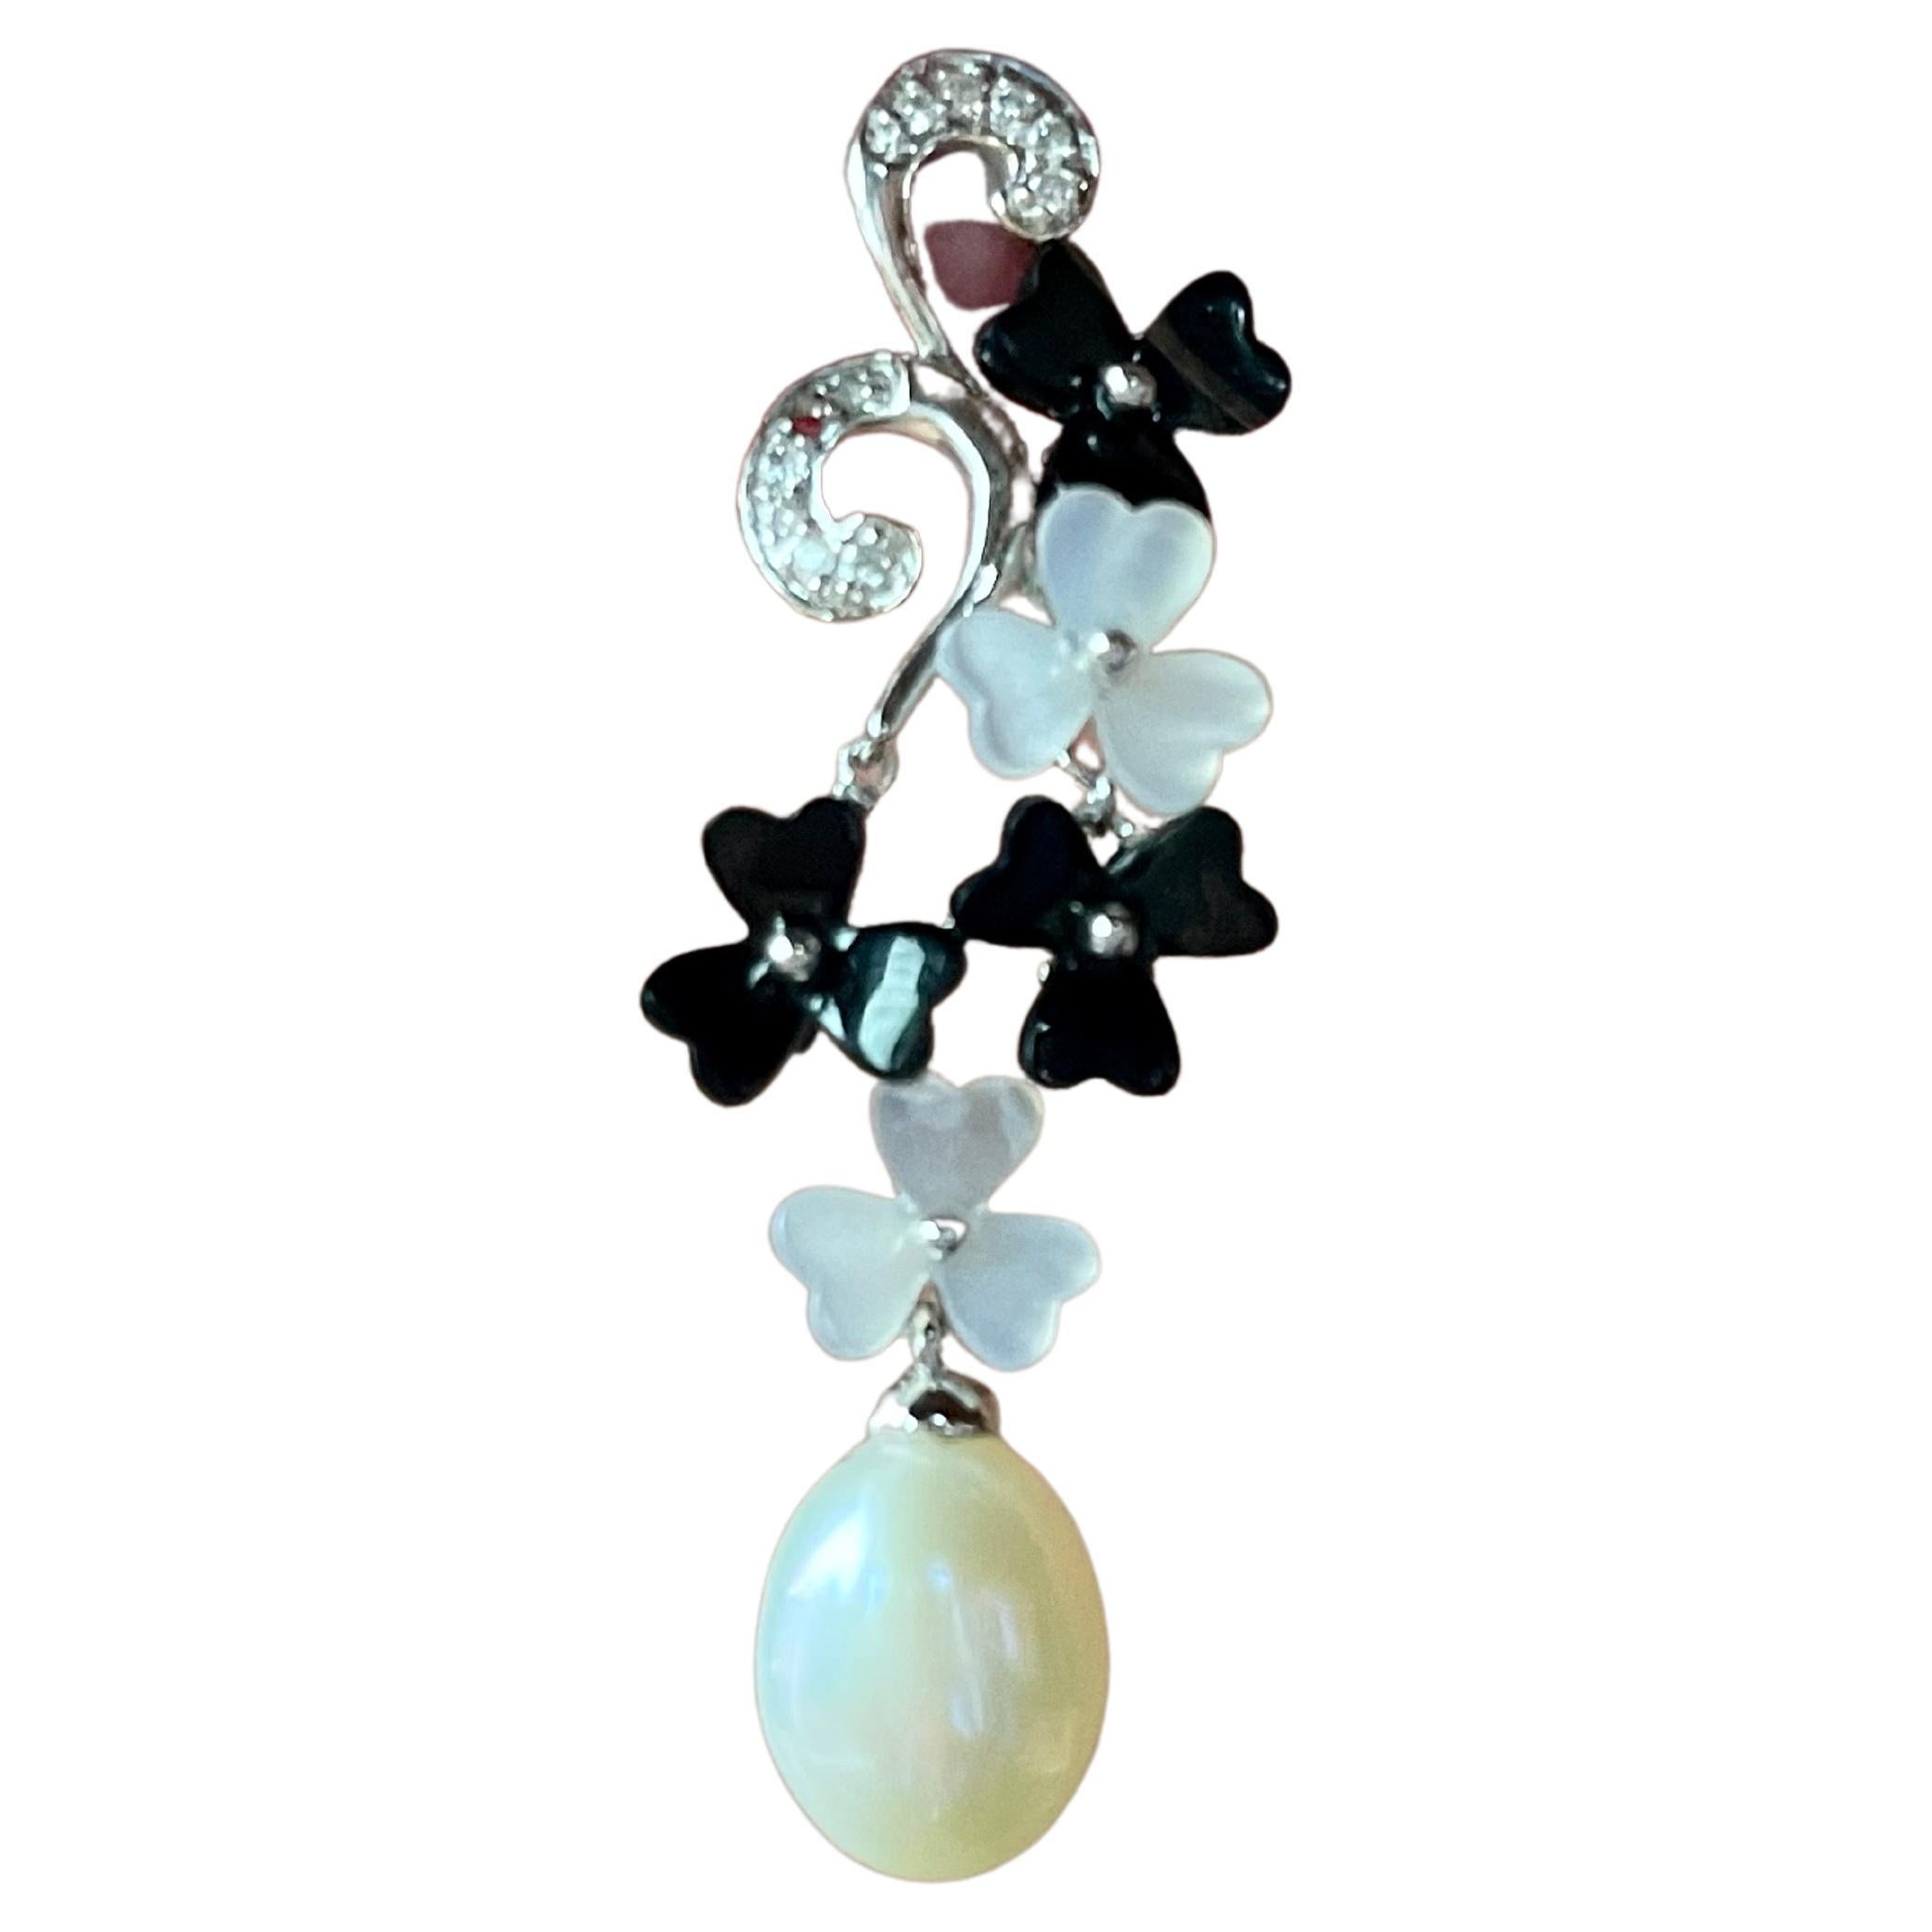 Lovely dangle earrings in 18 K white Gold featuring 2 freshwater cultured Pearls, carved flowers in Onyx and Mother of Pearl and tiny Diamonds. Length: 4.3 cm. 
Masterfully handcrafted piece! Authenticity and money back is guaranteed. 
For any